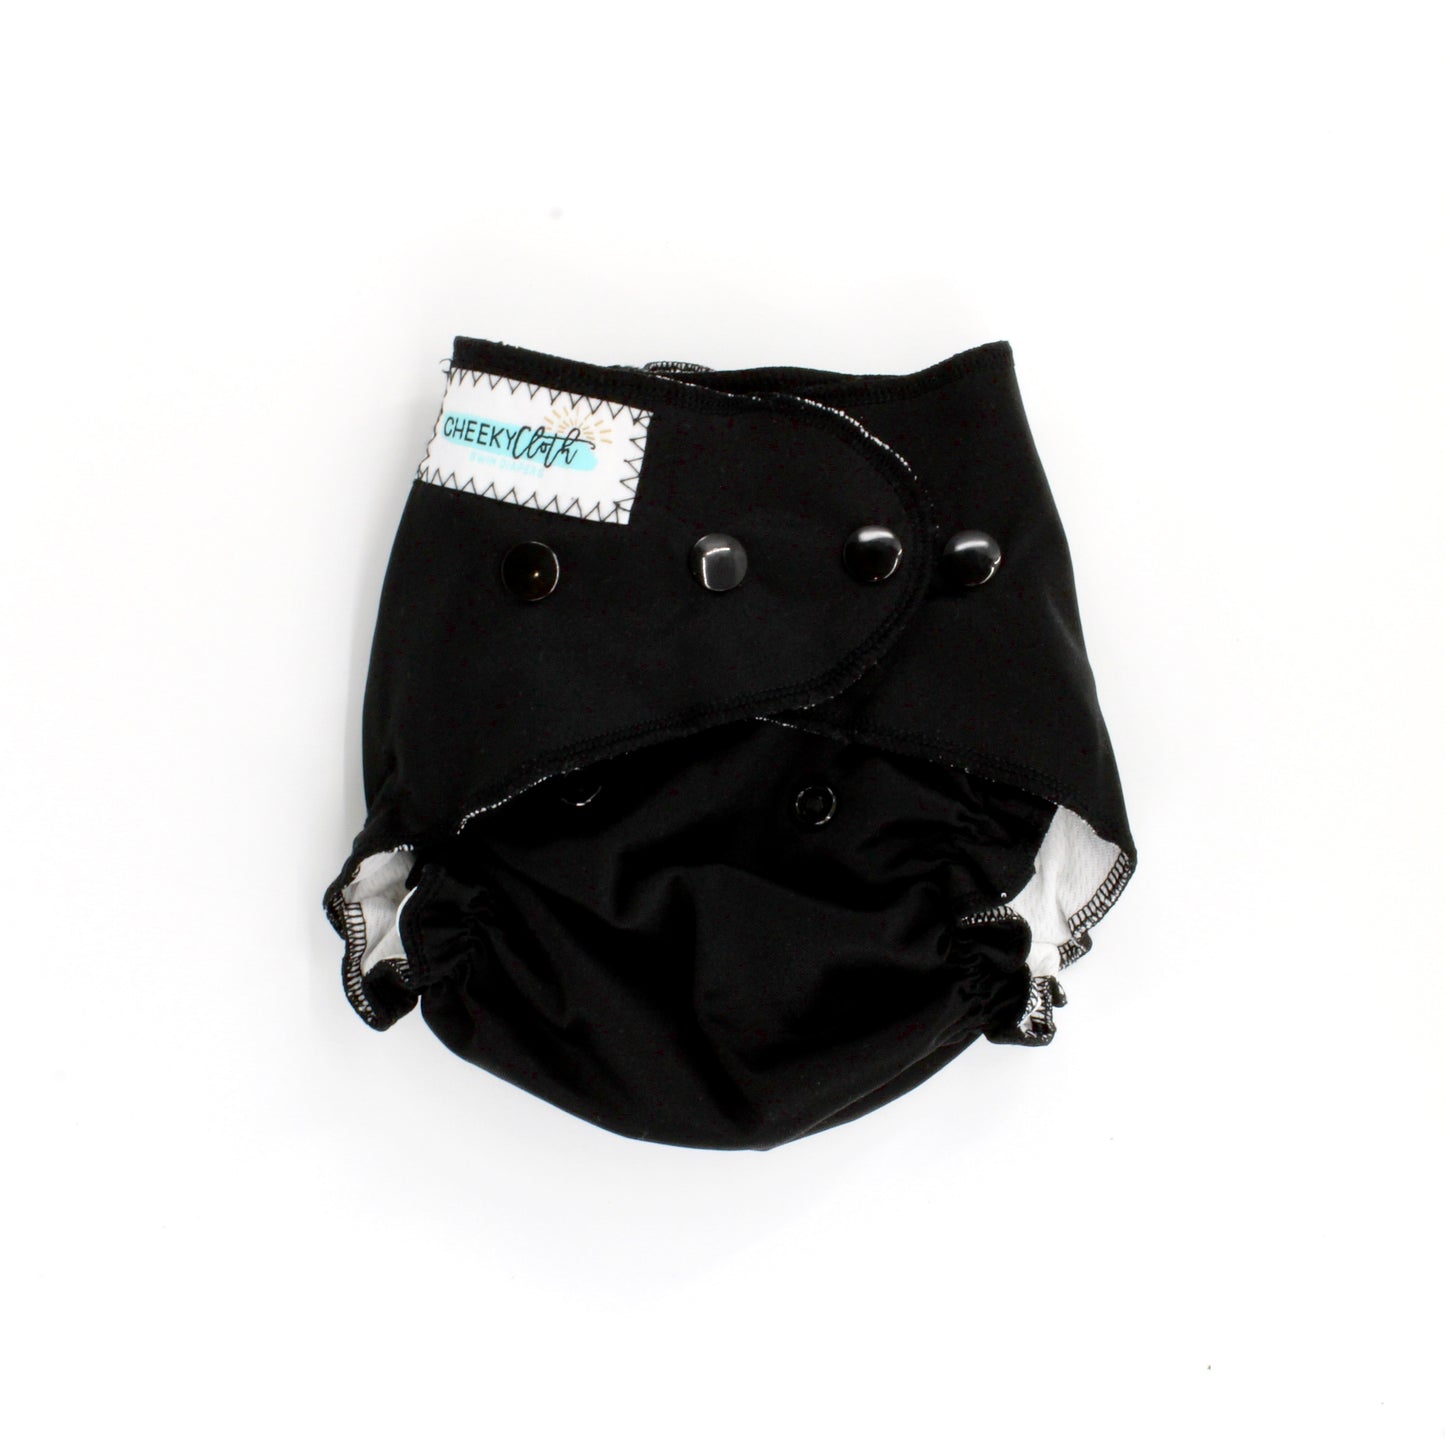 Cheeky Cloth One Size Reusable Swim Diaper "Back in Black"